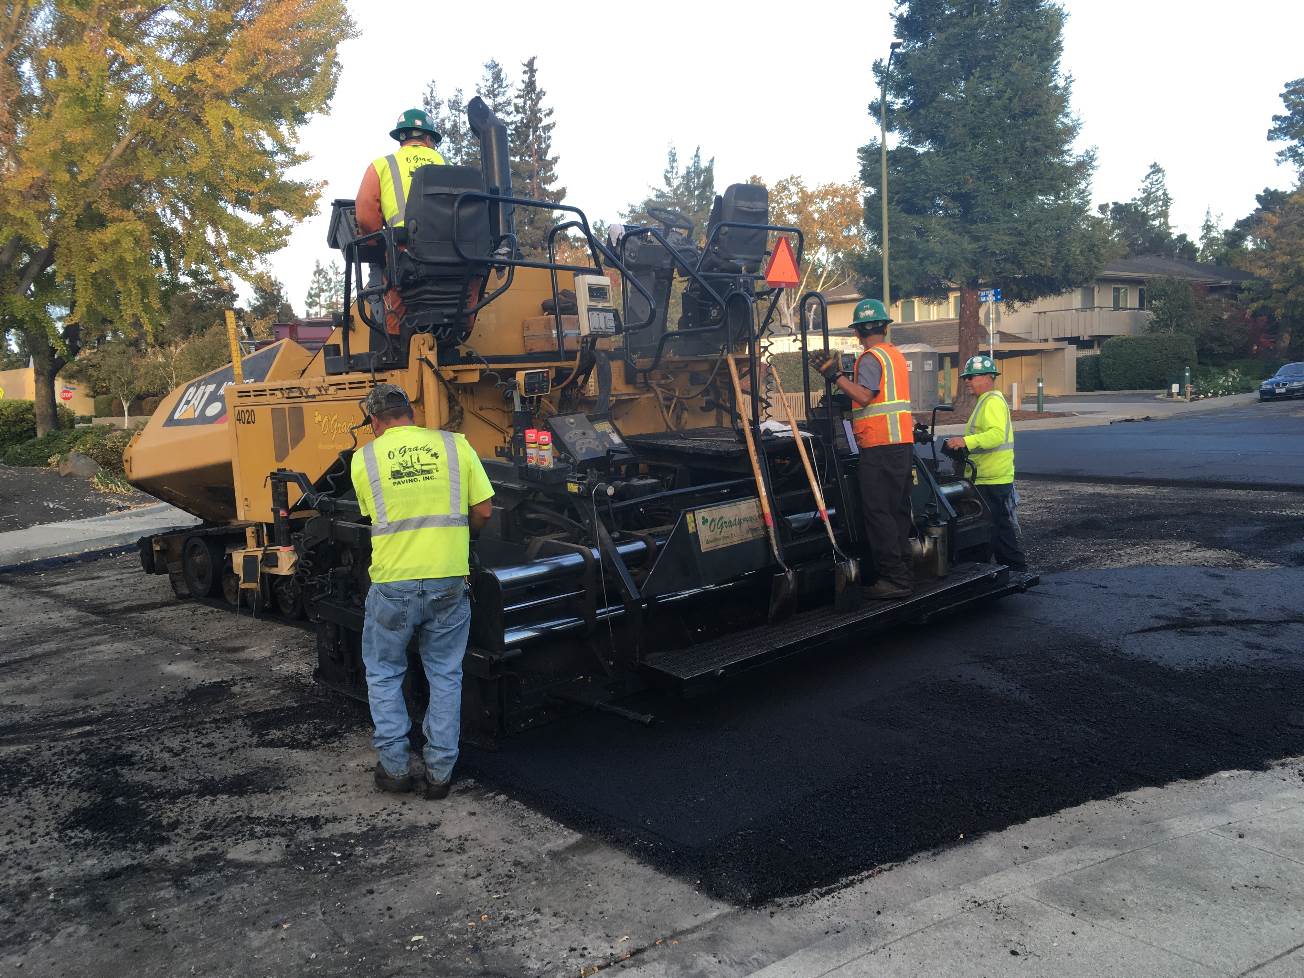 Workers pouring asphalt